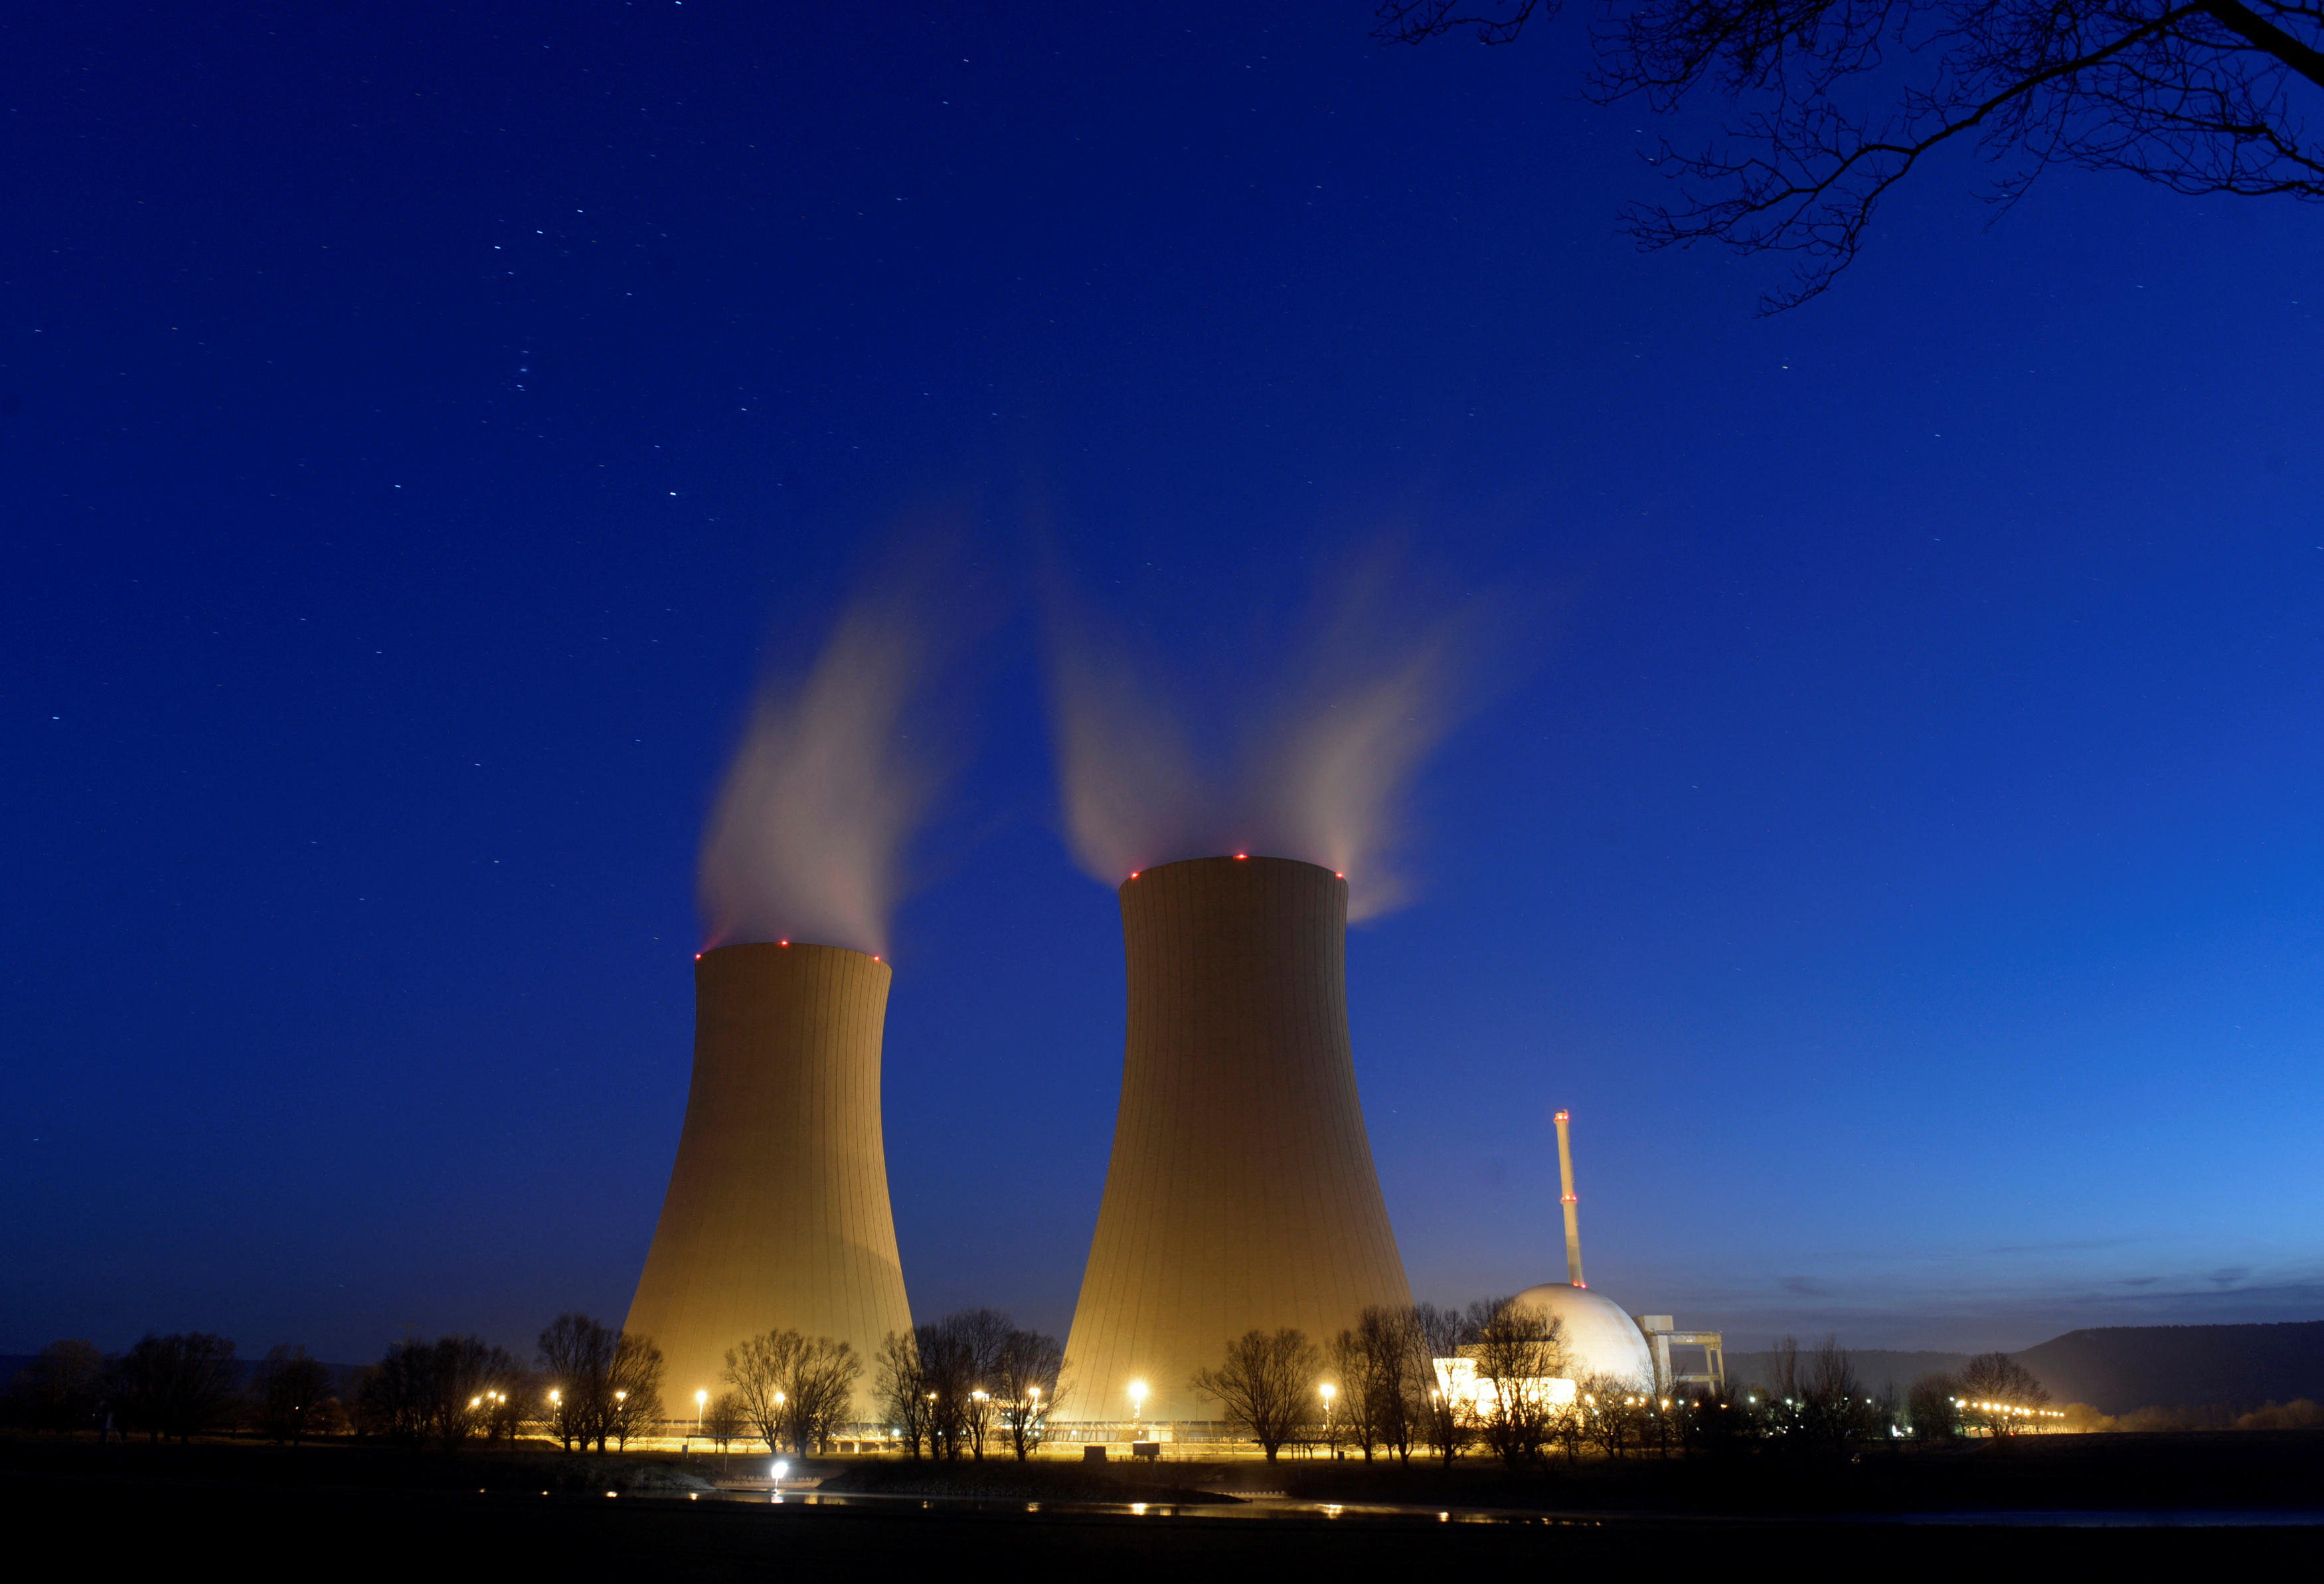 A long time exposure picture shows the nuclear power plant in Grohnde